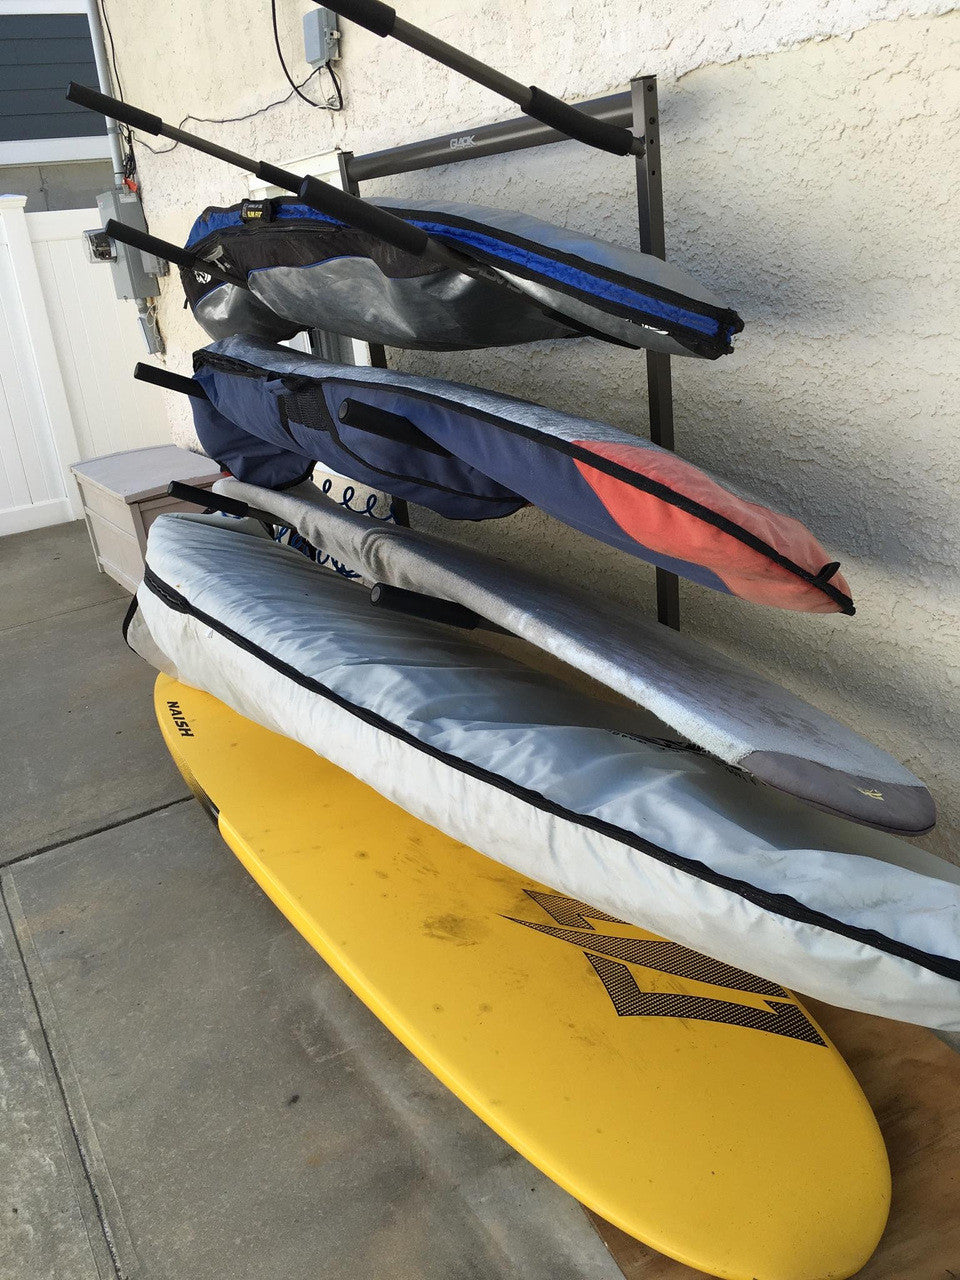 display rack for sups and surfboards